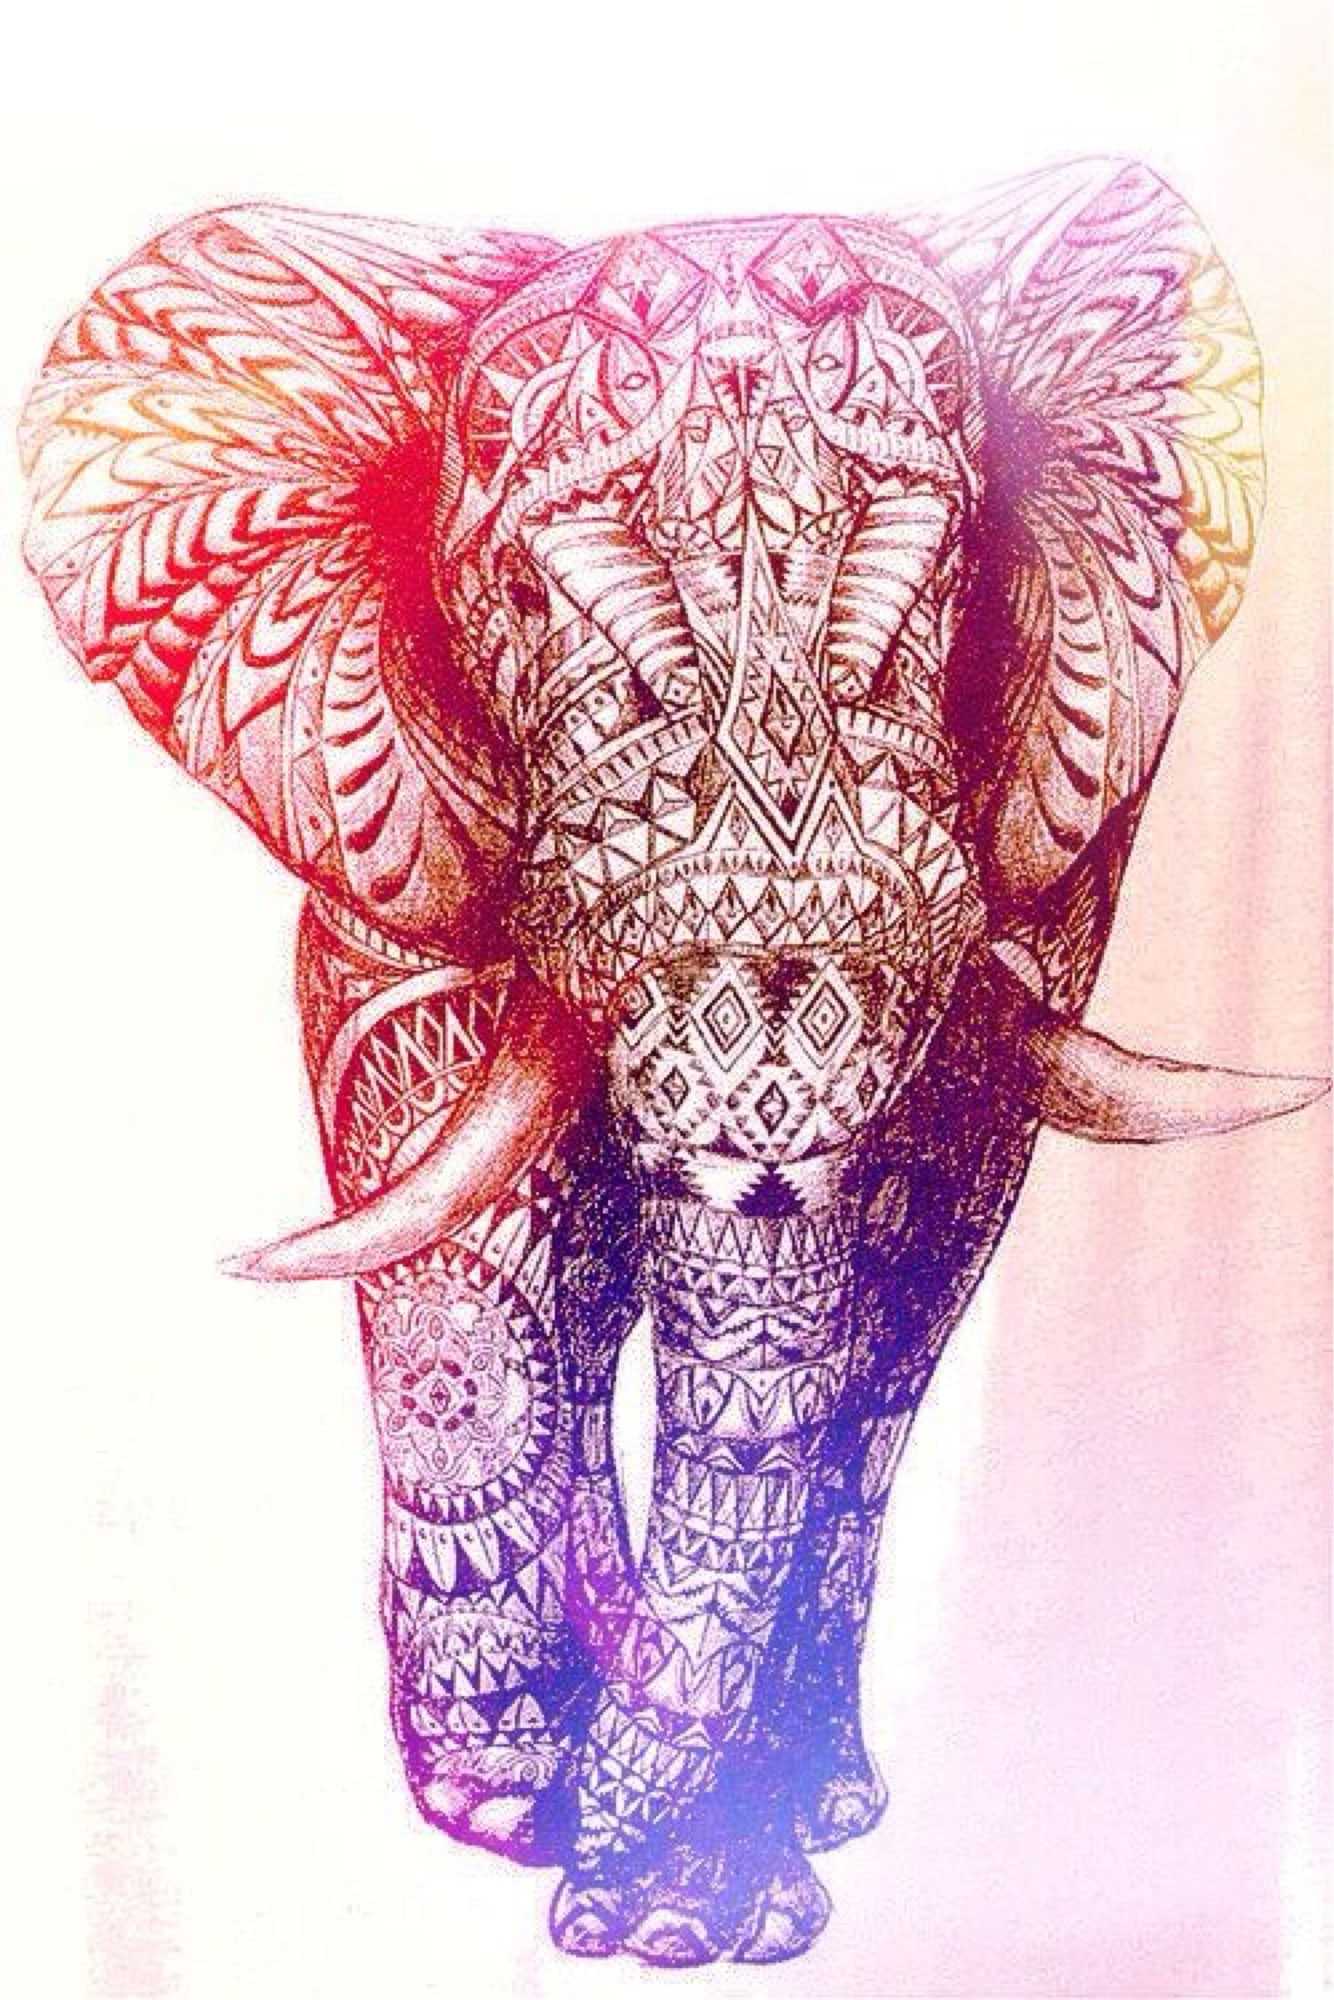 Colorful Elephant Wallpapers